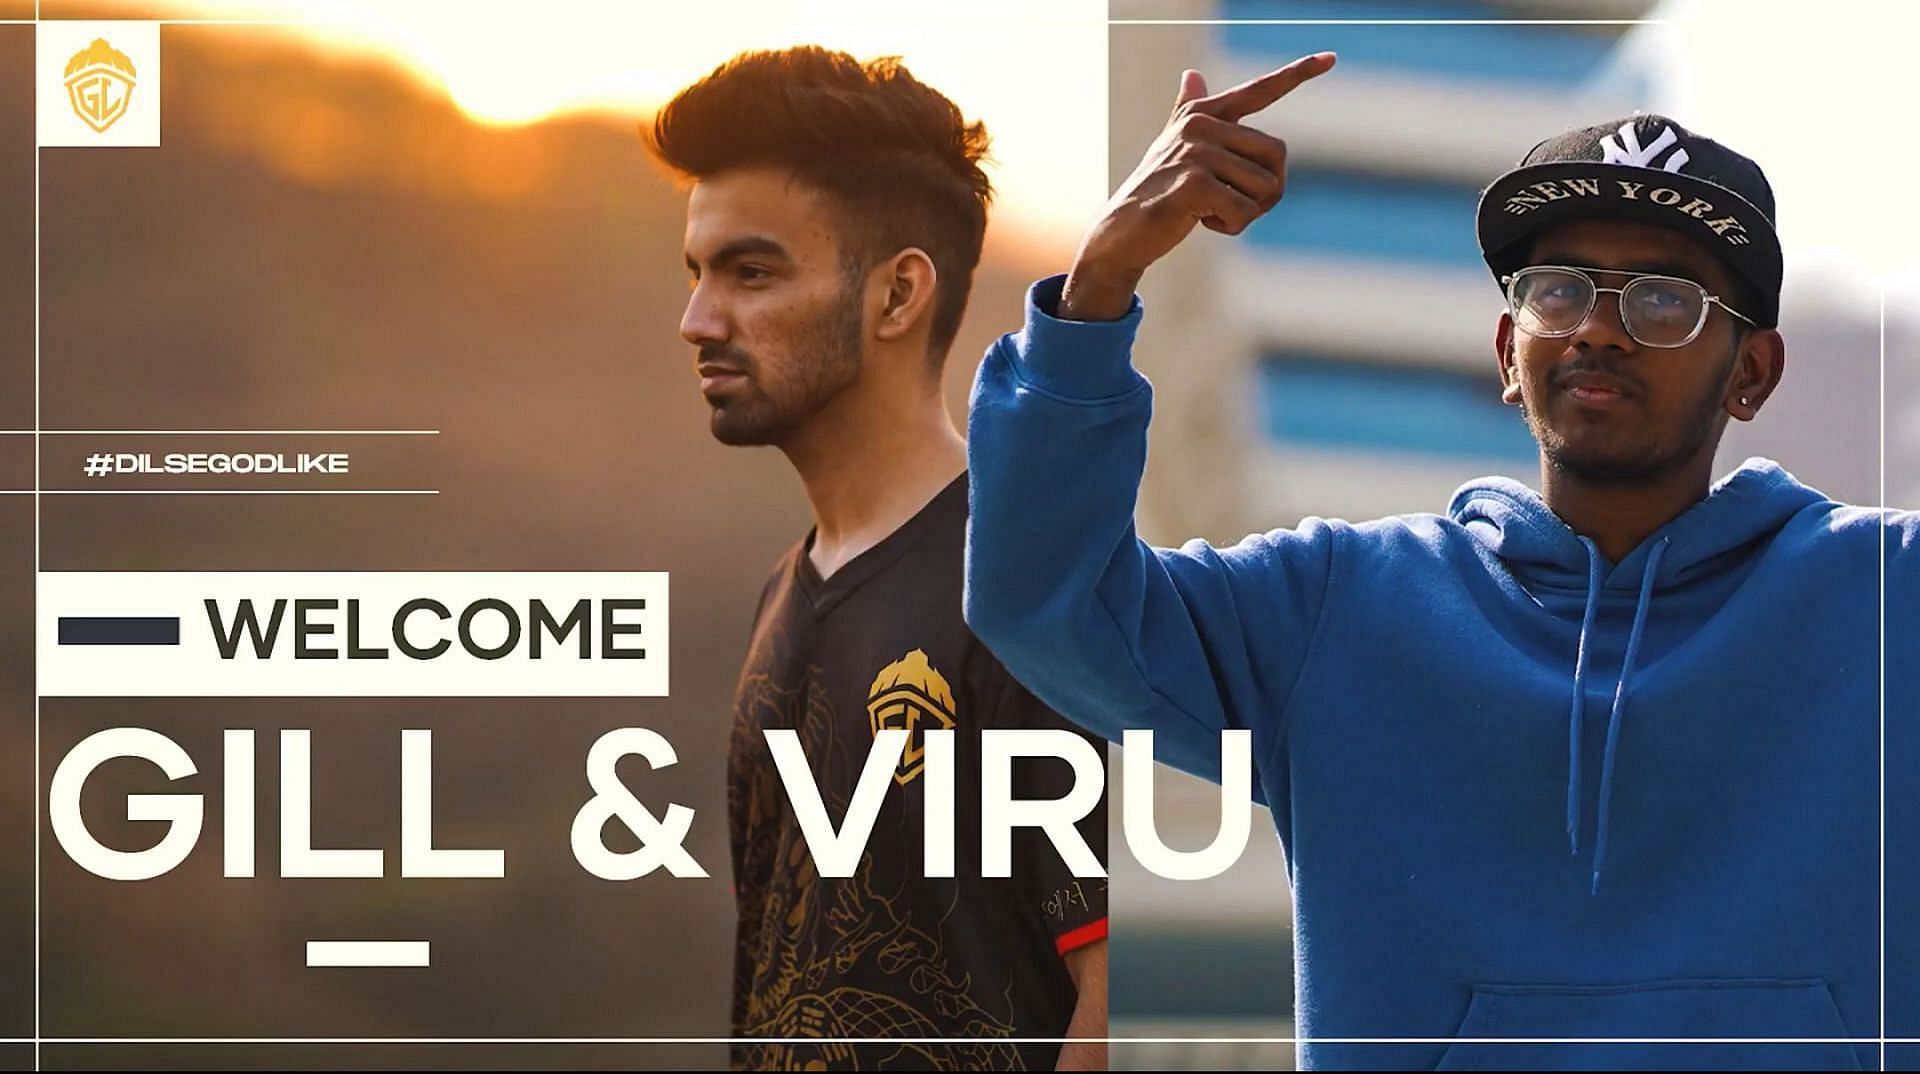 Viru and Gill&#039;s announcement video leaves fans divided in opinions (Image via GodL Esports)